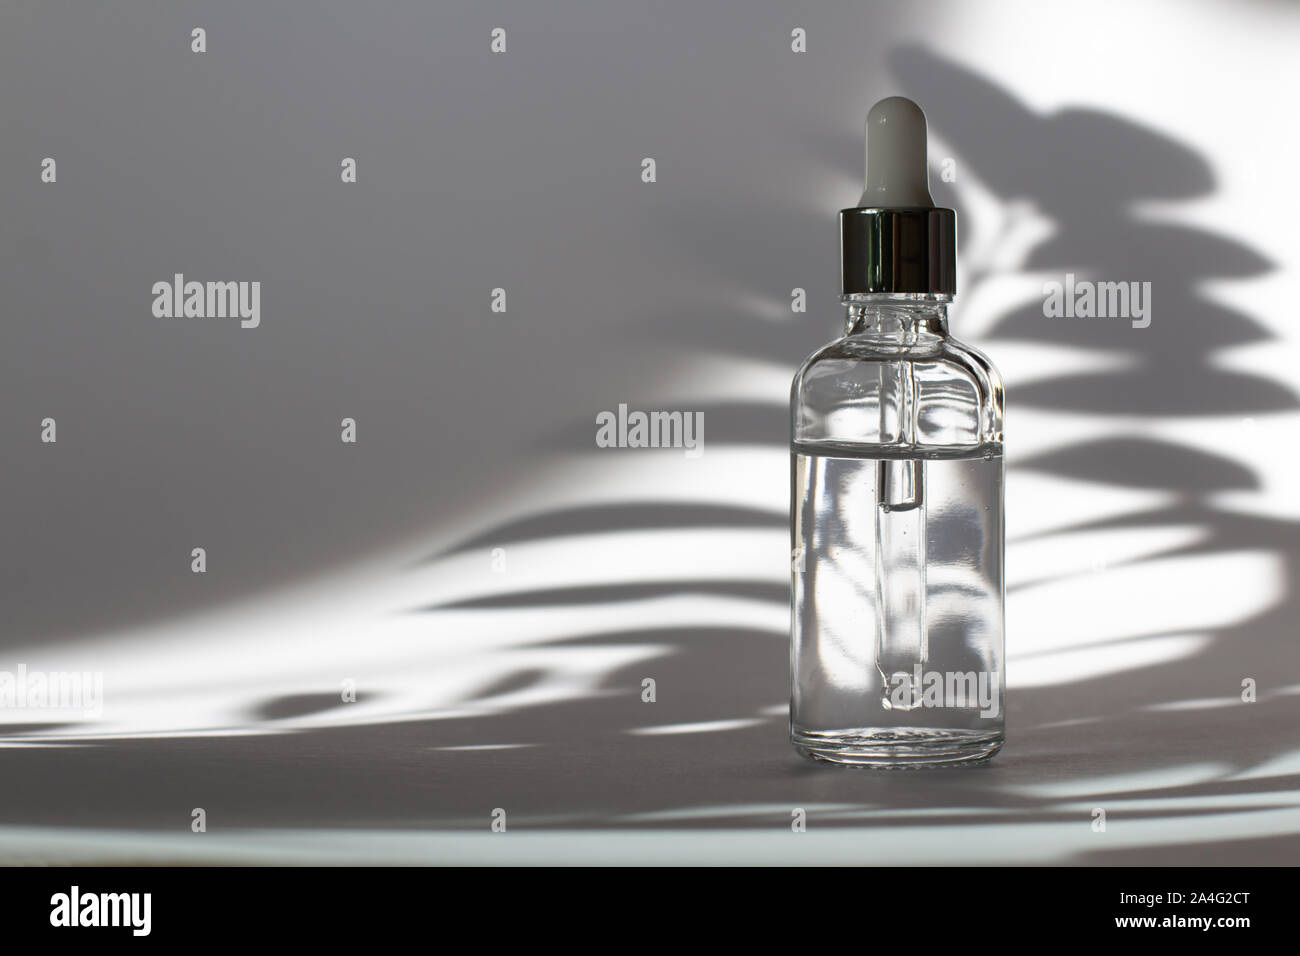 Download Cosmetic Bottle With Pipette Transparent Liquid Product In Glass Bottle With Dropper Serum Skin Care On Light Grey Background And Plant Shadows Front View With Copy Space Beauty Product Mockup Stock Photo